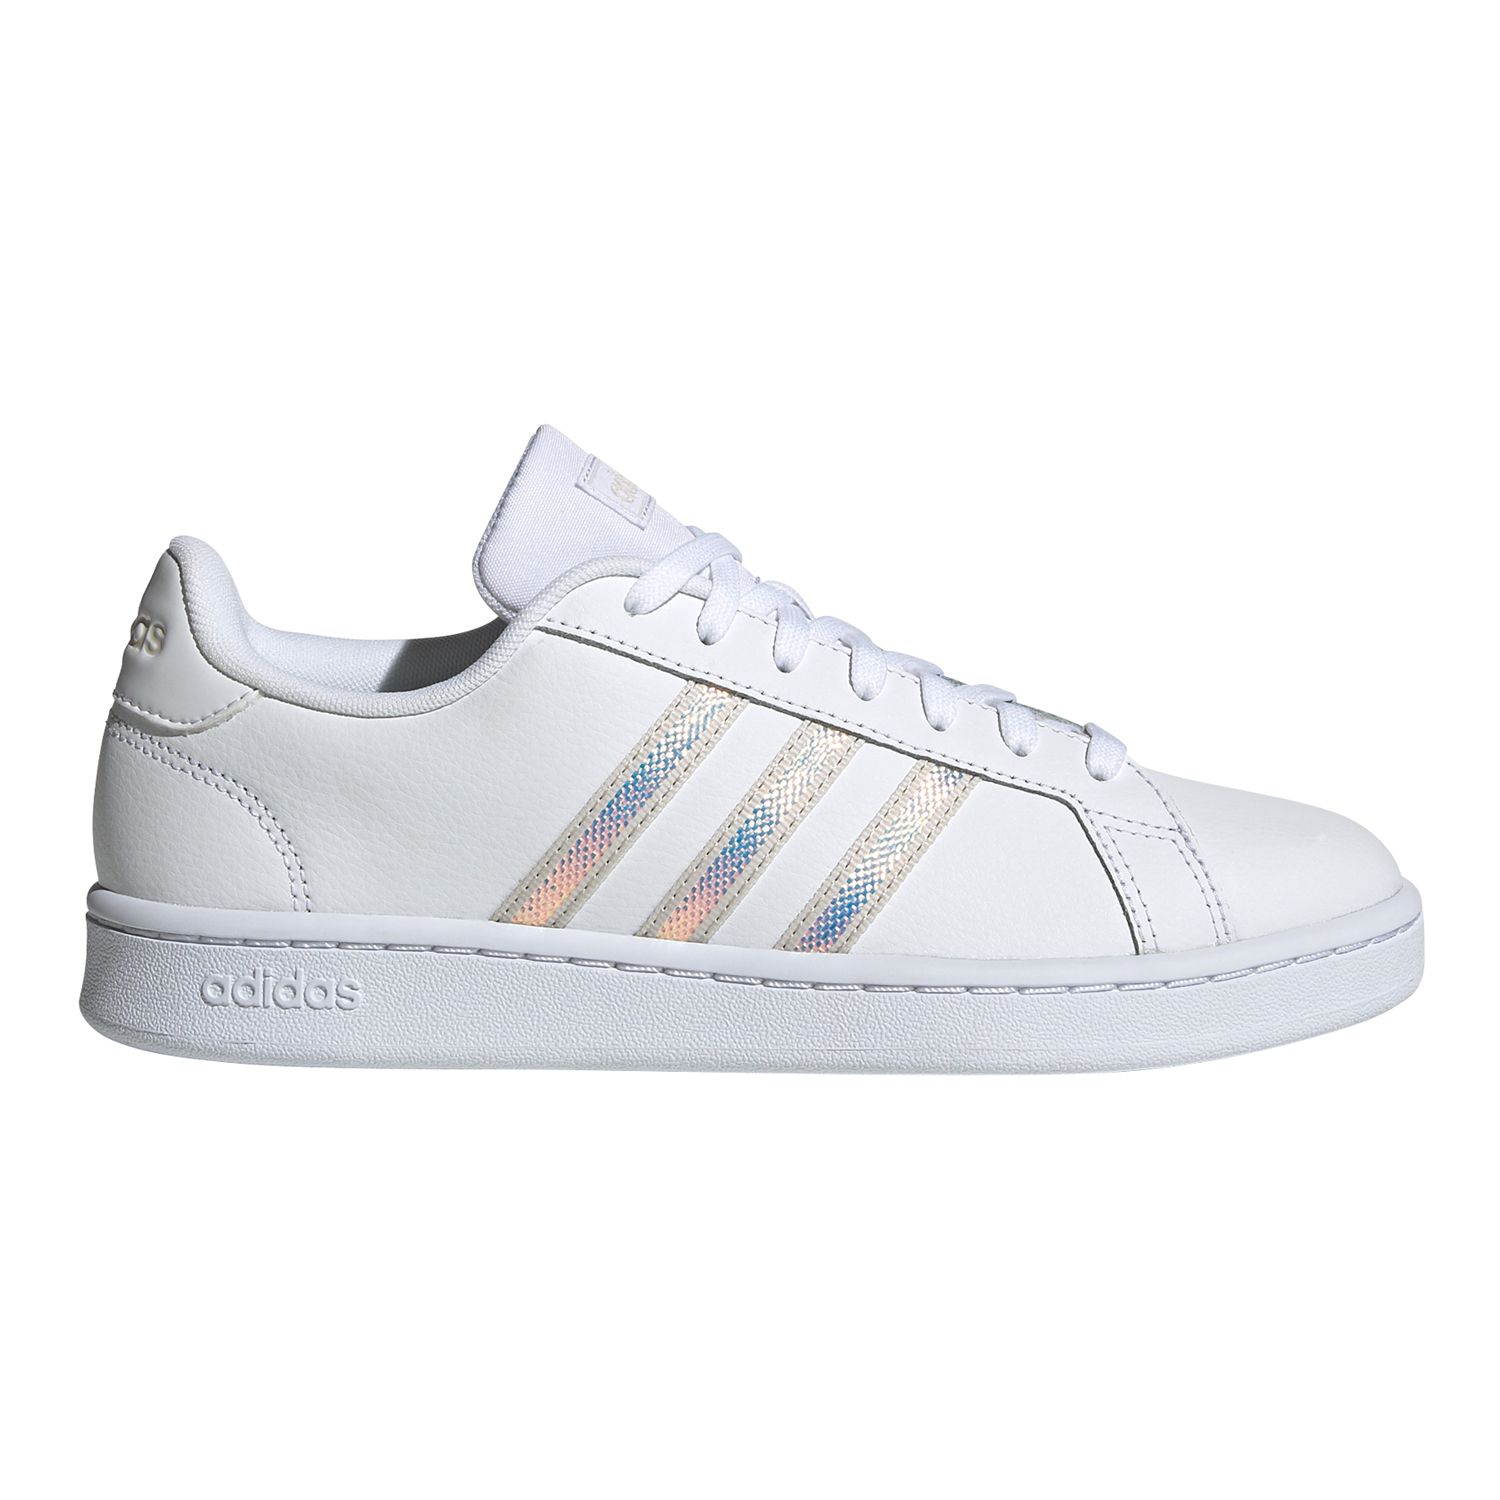 women's white and grey adidas shoes